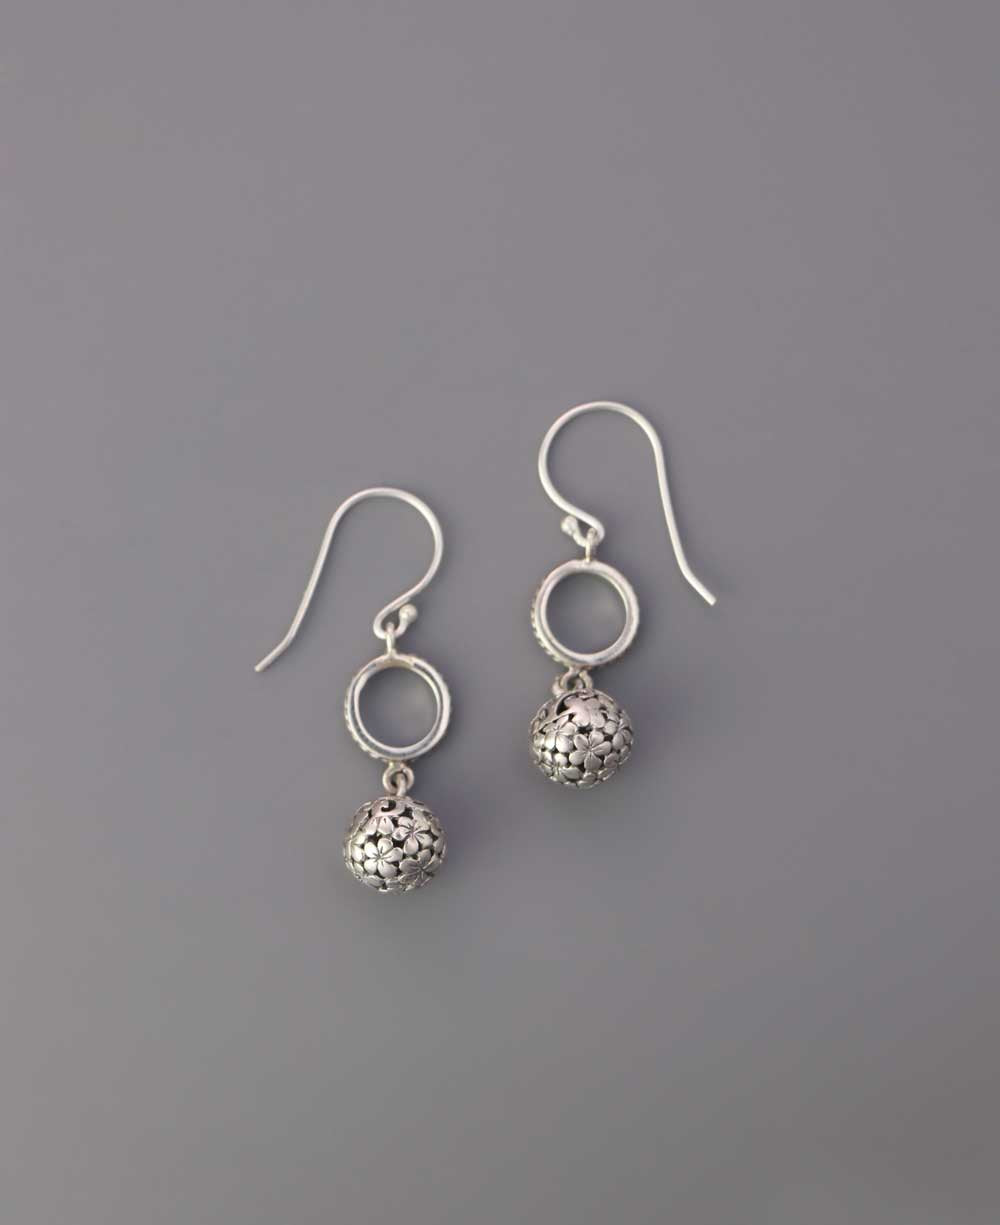 Hand-hammered sterling silver earrings